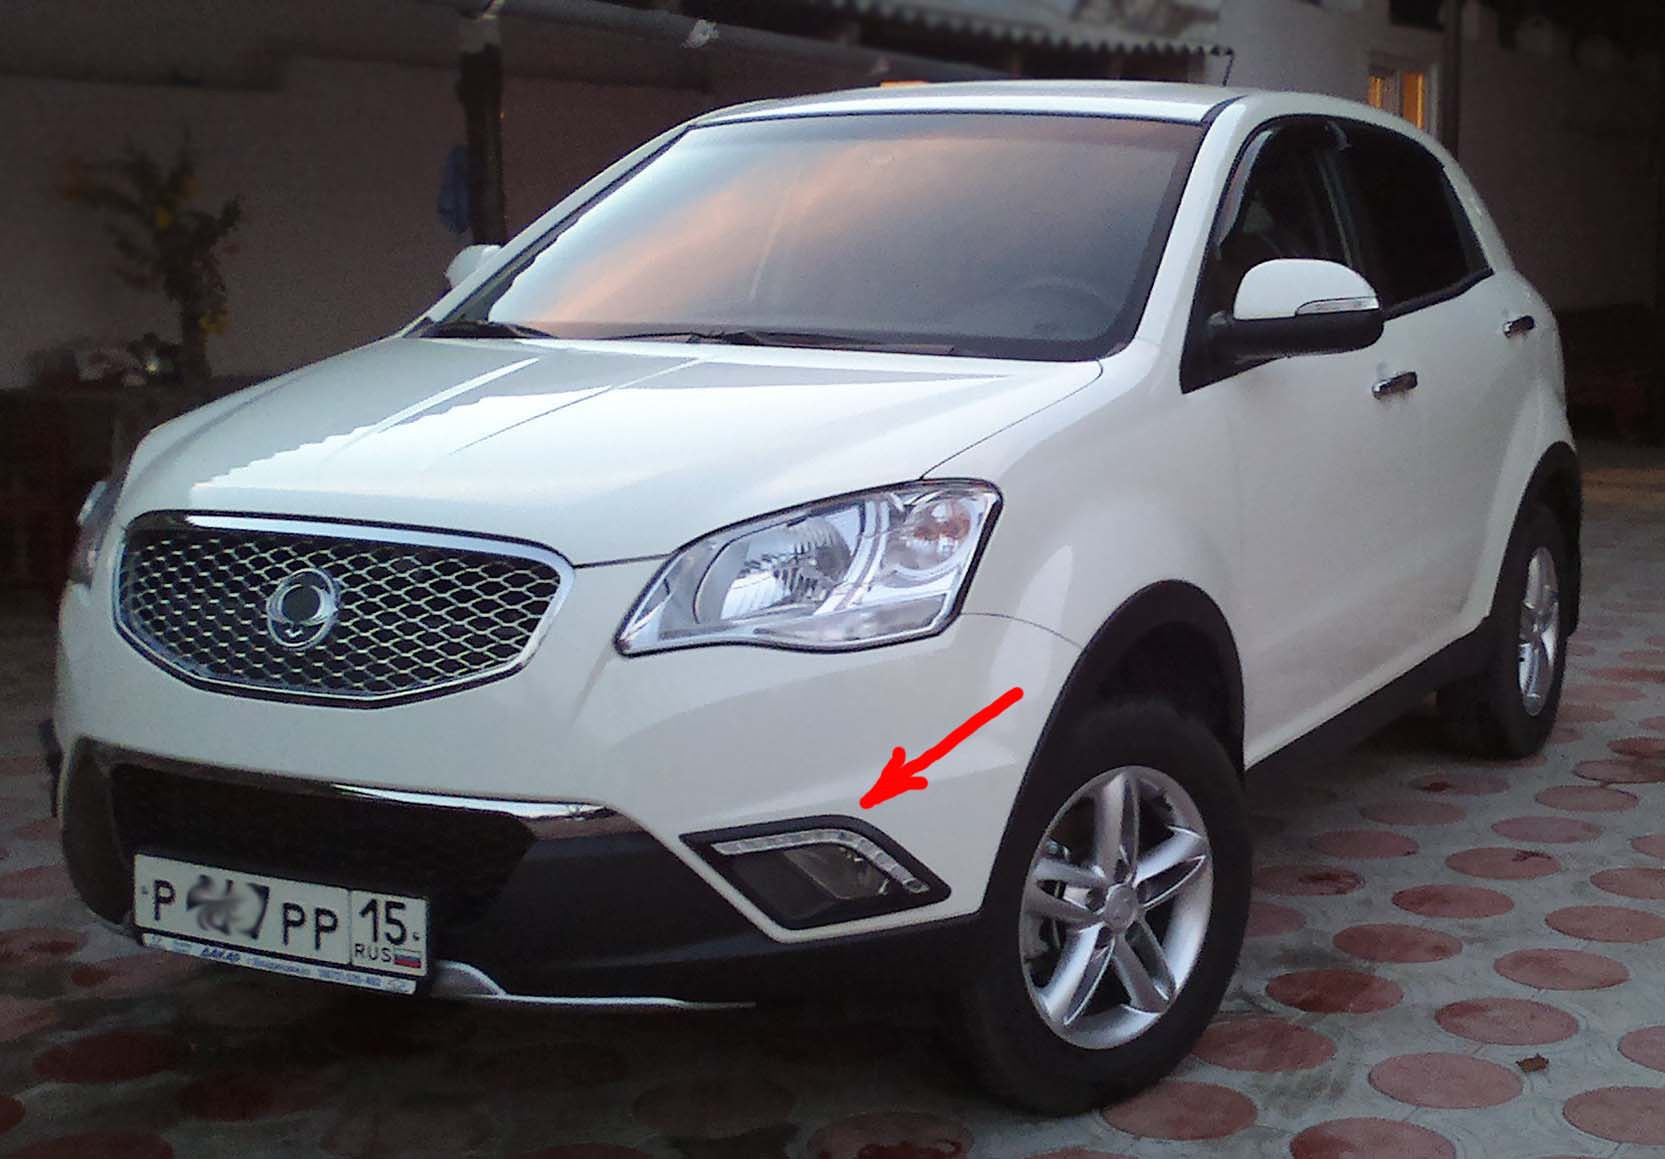 New actyon 2013. SSANGYONG Actyon 2012. Санг Йонг Актион 2011. Саньенг Актион 2011. SSANGYONG Actyon (2g).